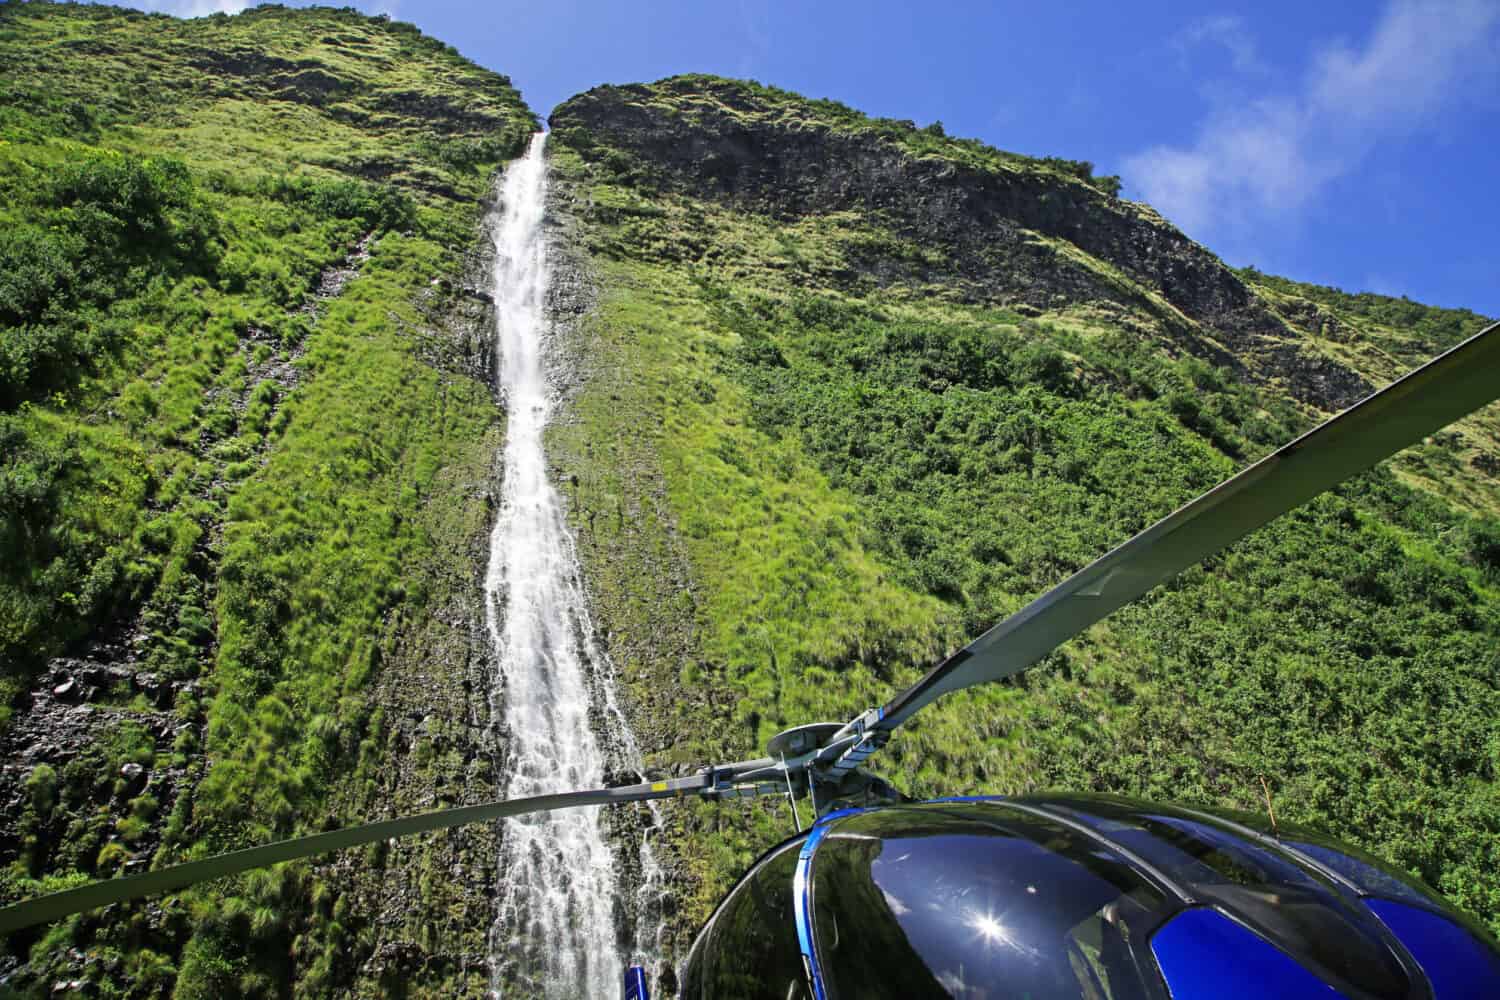 Waterfall on the Kohala Coast of the Big Island of Hawaii (and the helicopter that landed right in front of it)